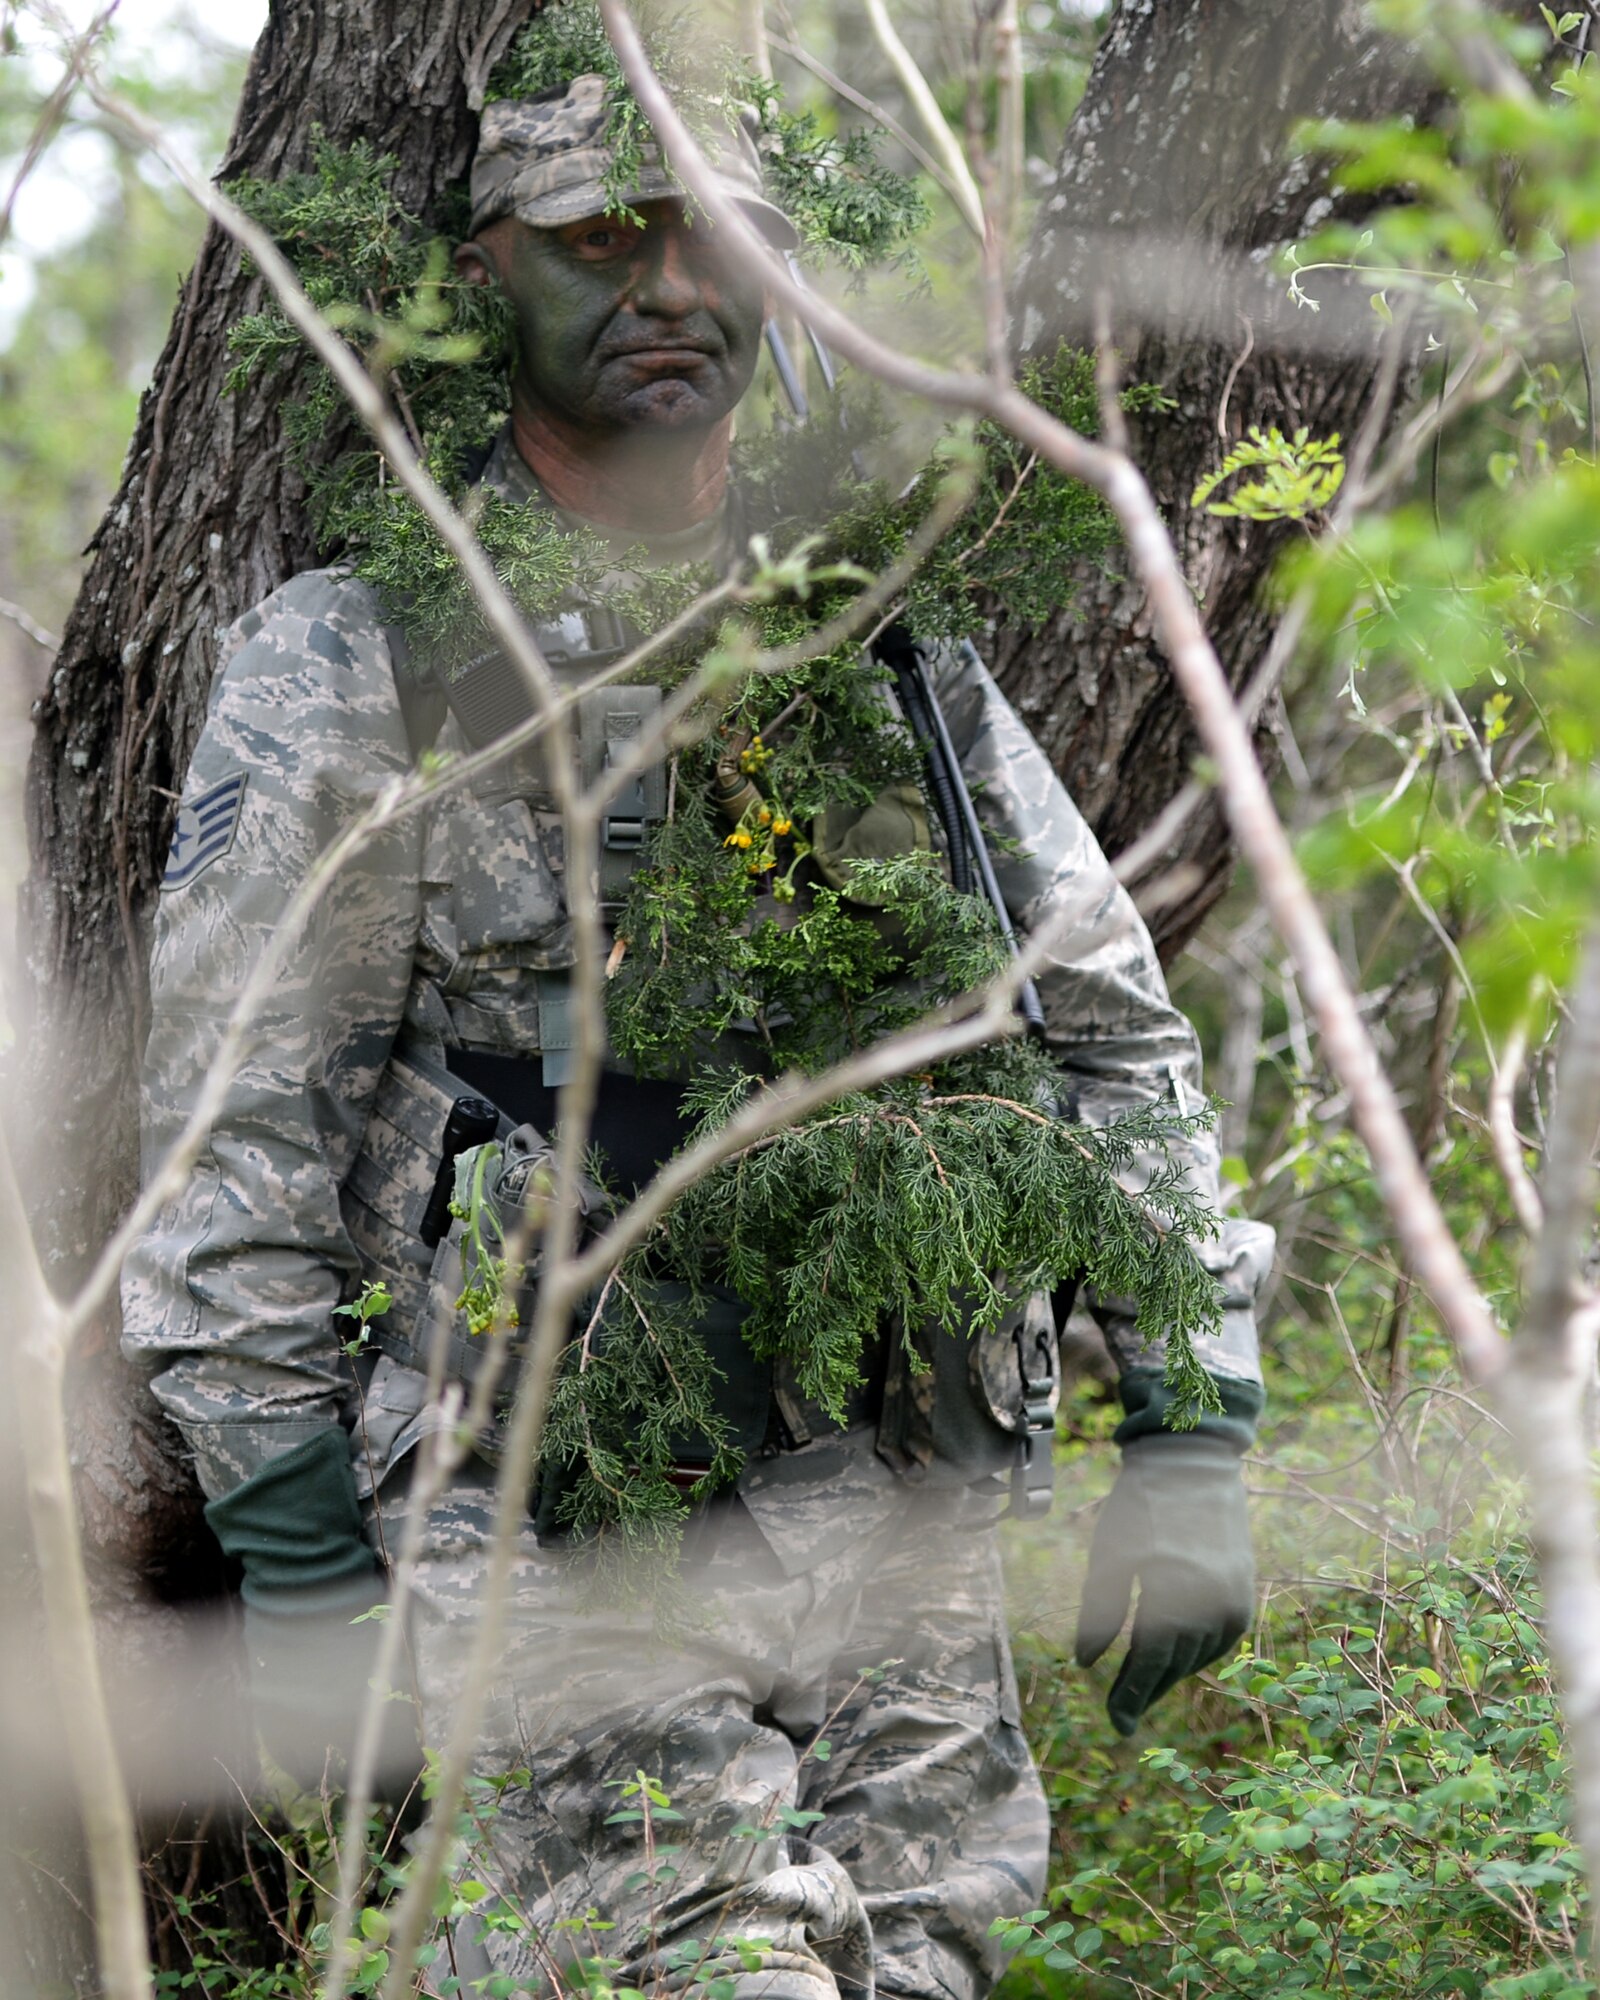 A staff sergeant with the 147th Air Support Operations Squadron, 147th Reconnaissance Wing, based at Ellington Field Joint Reserve Base in Houston, Texas, waits for other members from the squadron to track him during land navigation and vehicle navigation training at the squadron's annual field training exercise April 3, 2014, at Camp Swift in Bastrop, Texas. The support personnel also participated in the annual exercise to test the requirements necessitated by being members of an ASOS unit.